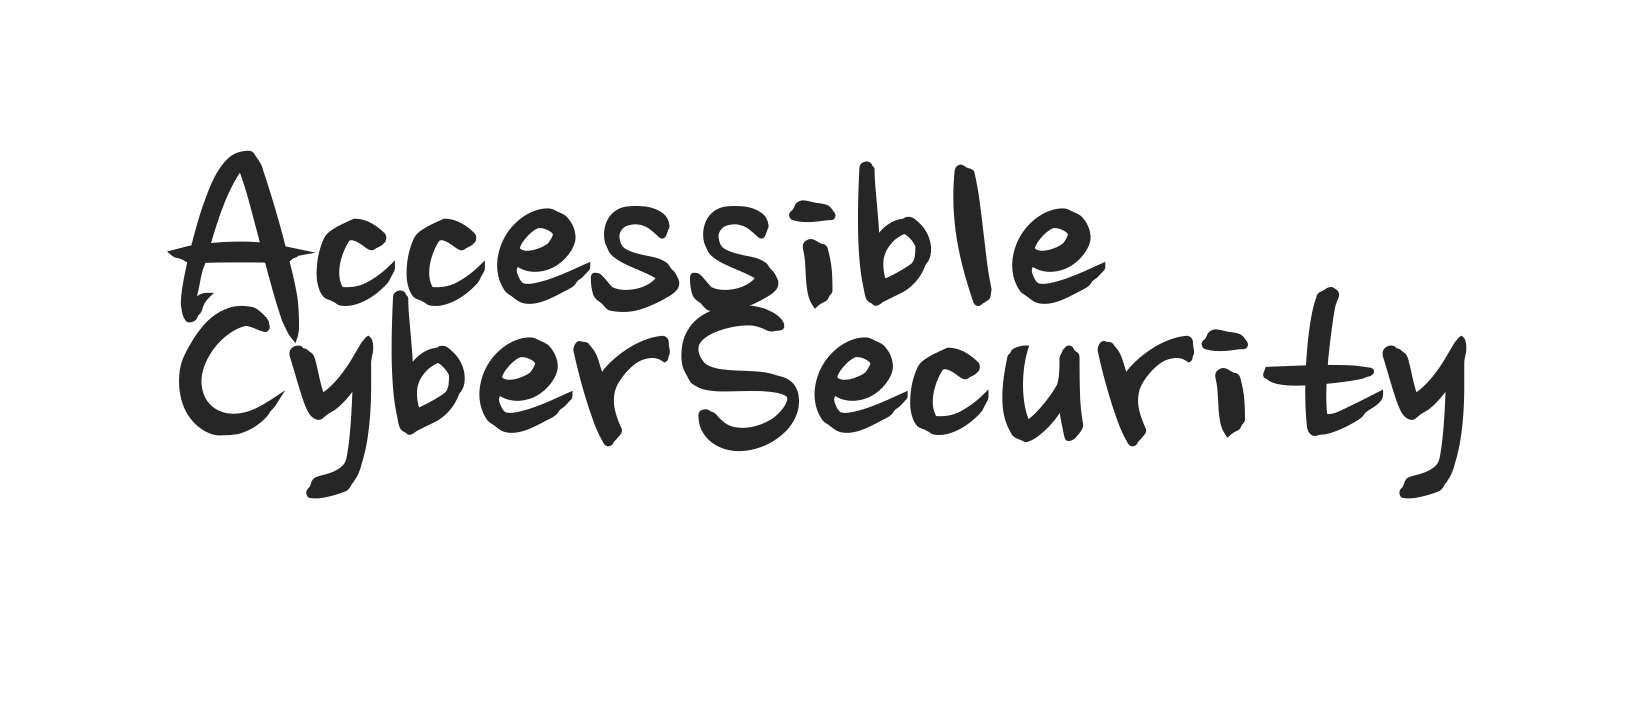 Accessible Cybersecurity Logo